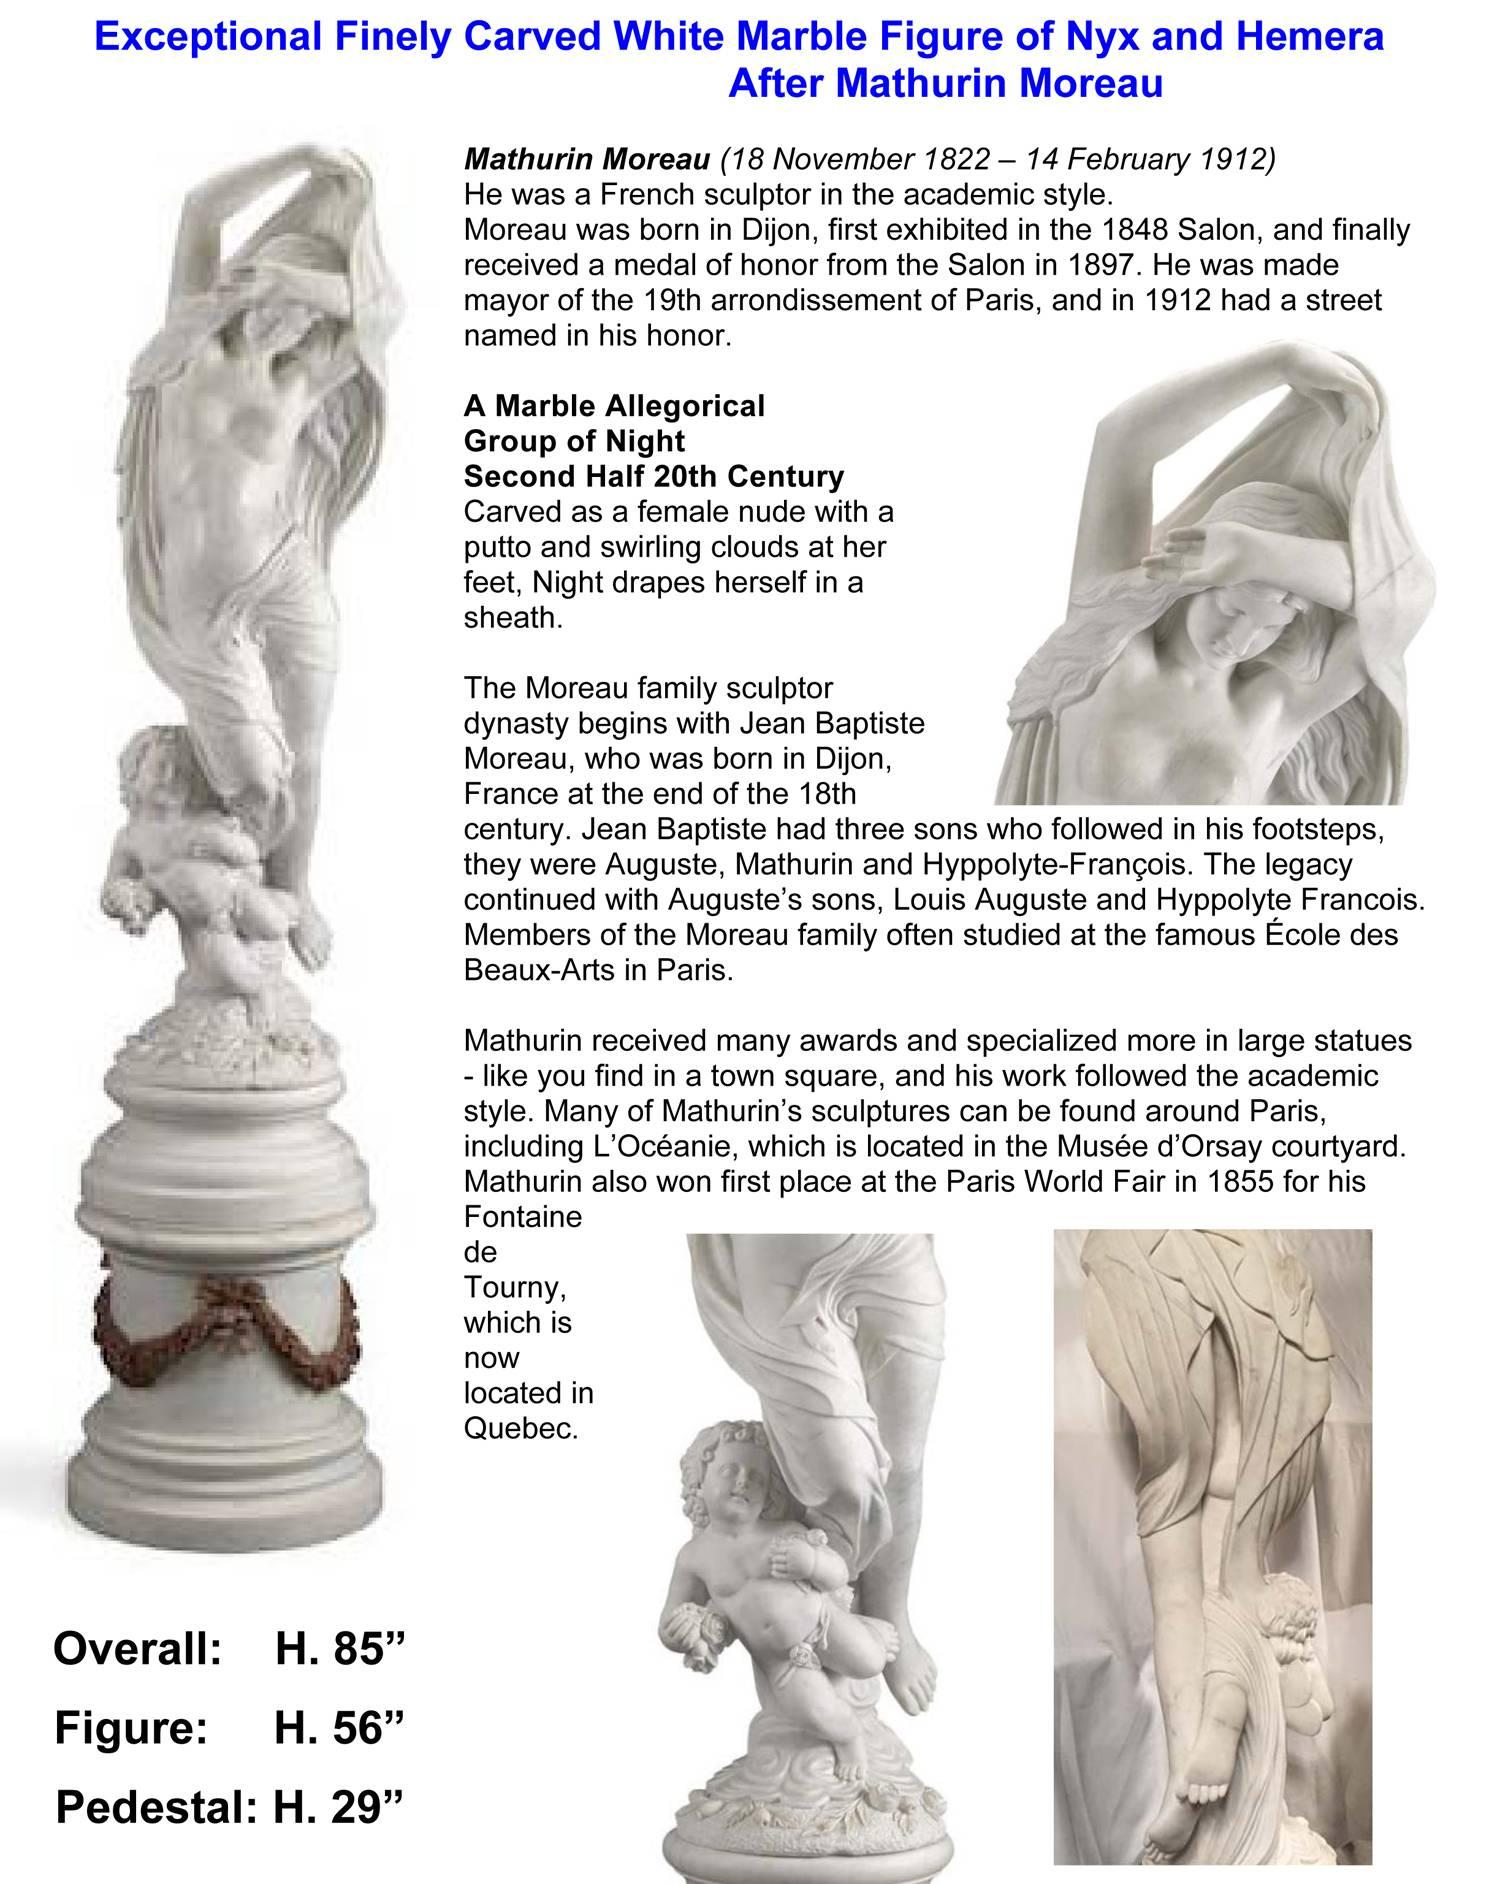 Fabulous continental (possibly Italian) finely carved white marble figure of Nyx, the Night Goddess of Greek mythology born of Chaos, flying over the clouds with a well carved child representing her son Hemera the Goddess of the Day who is palming